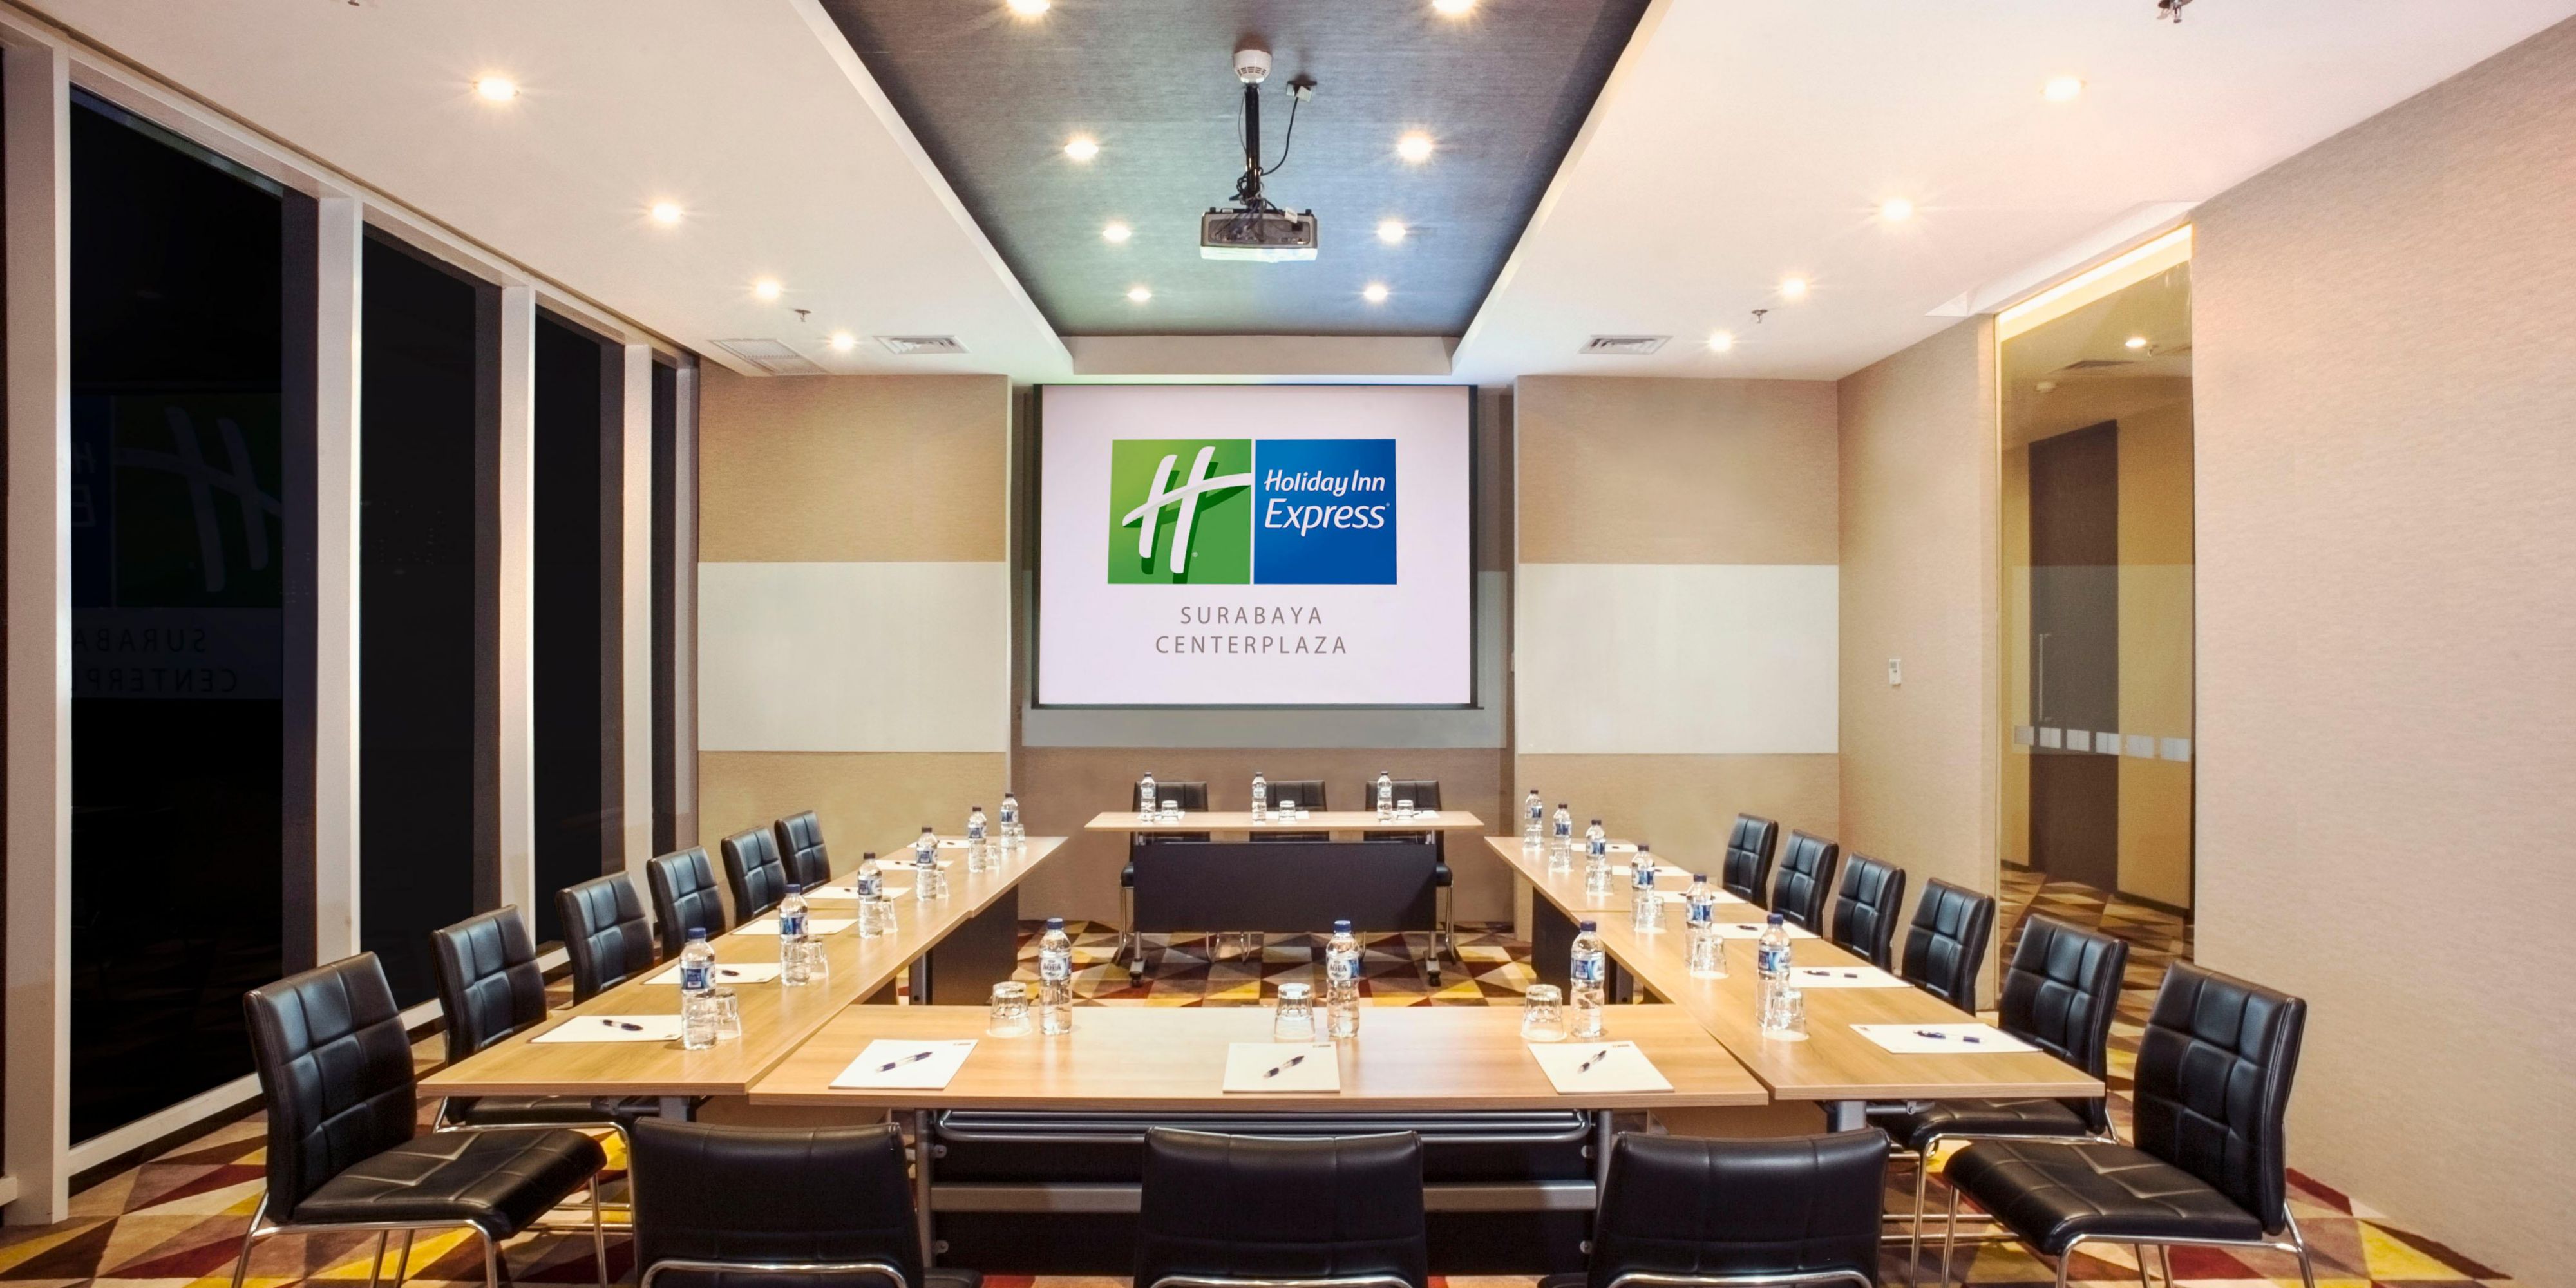 Make your meeting in Surabaya a success at Holiday Inn Express Surabaya Center Point. Take advantage of our meeting room features that can accommodate up to 200 persons with the latest technology and equipment provided.